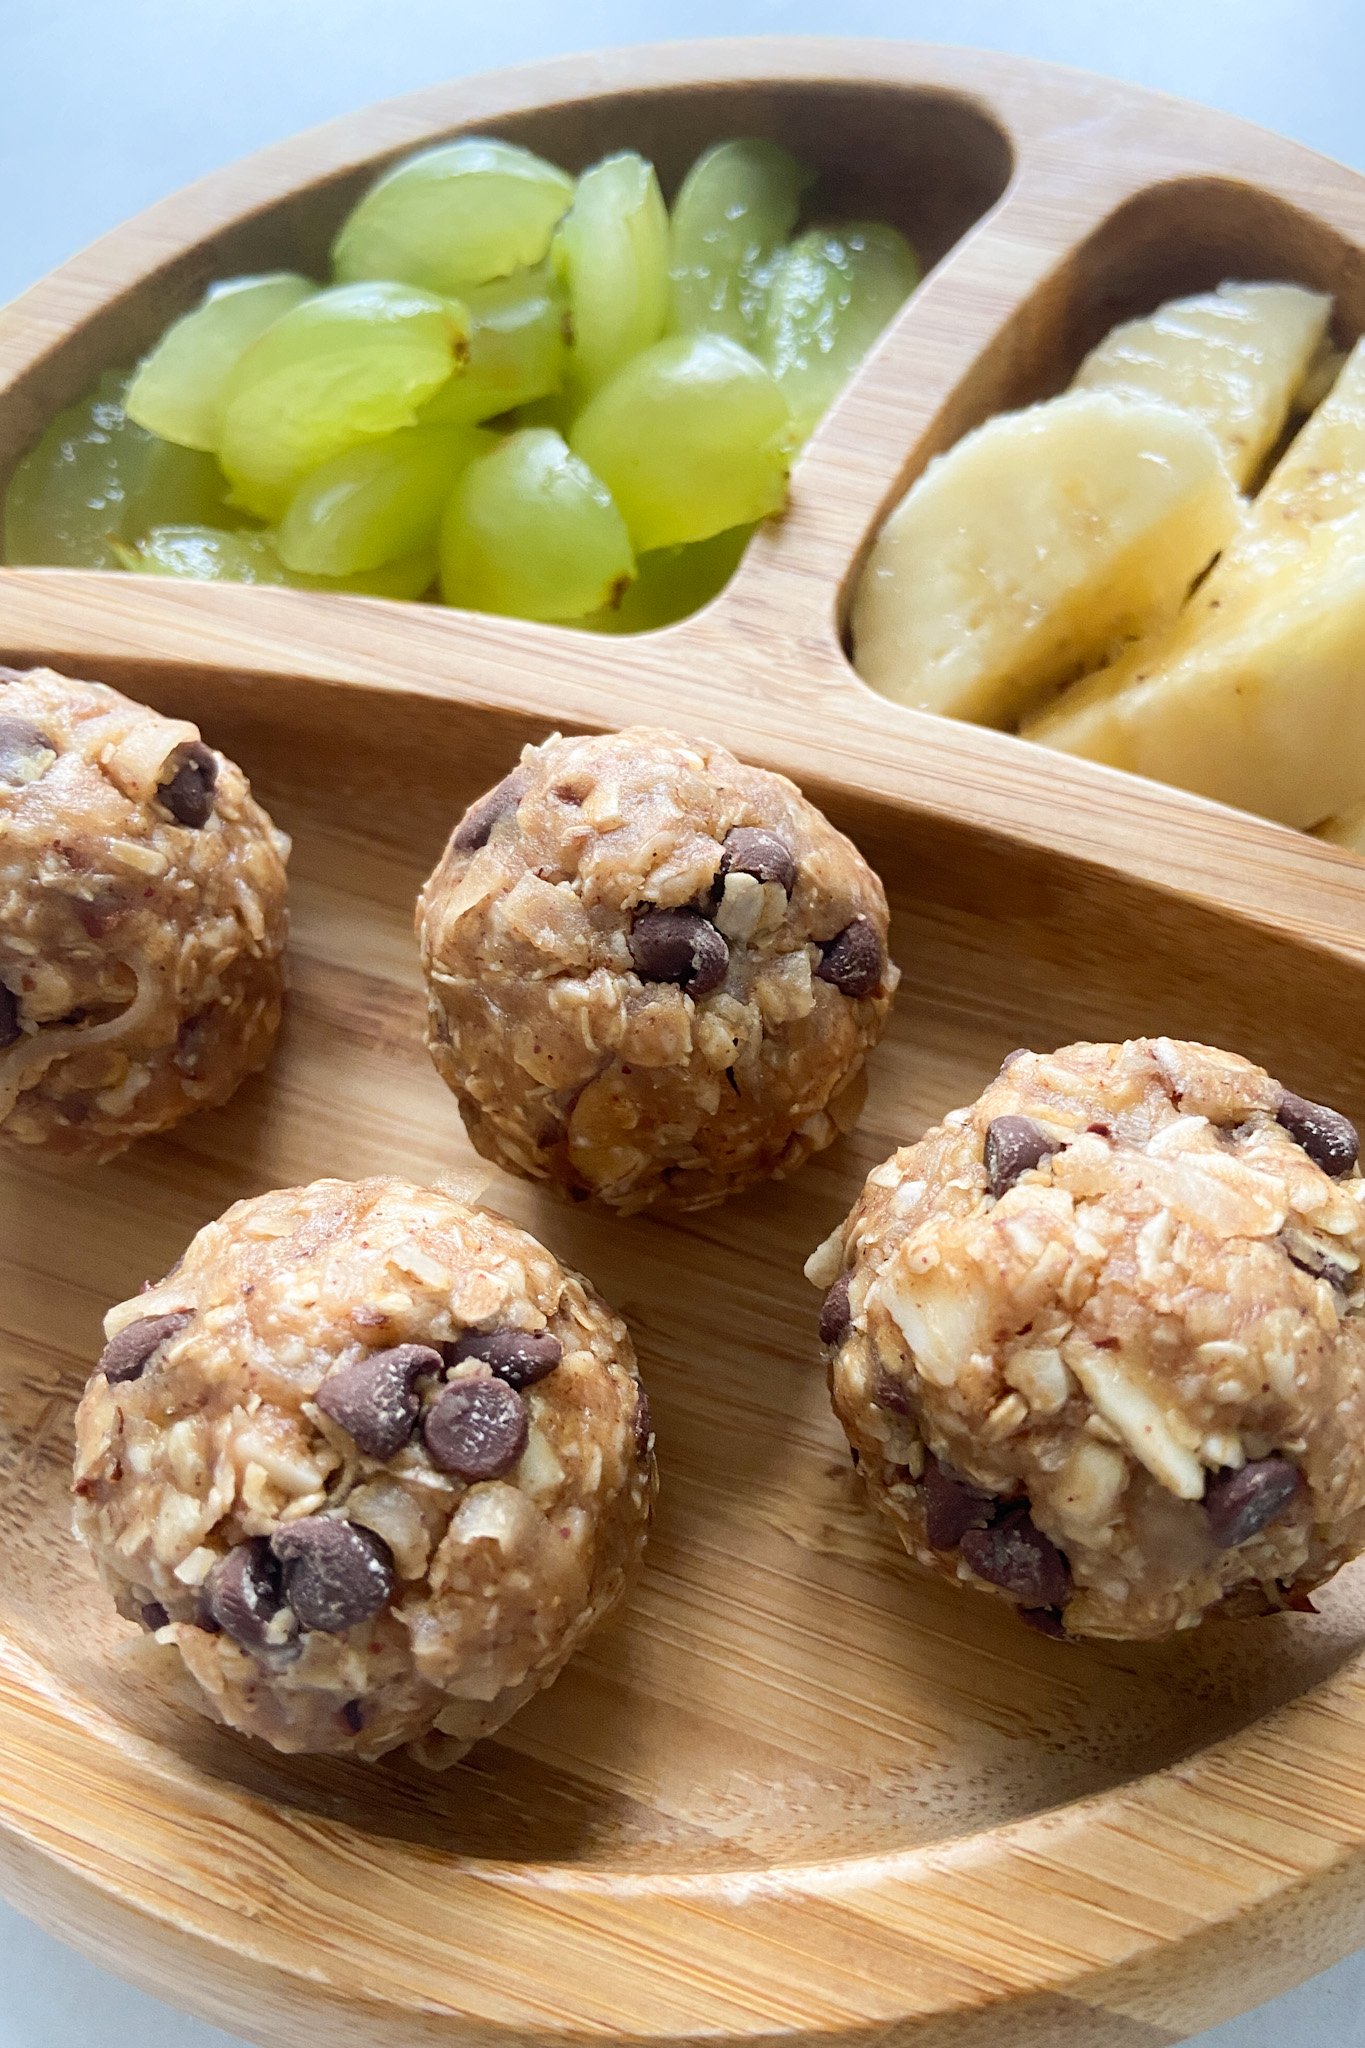 Granola balls served with fruits